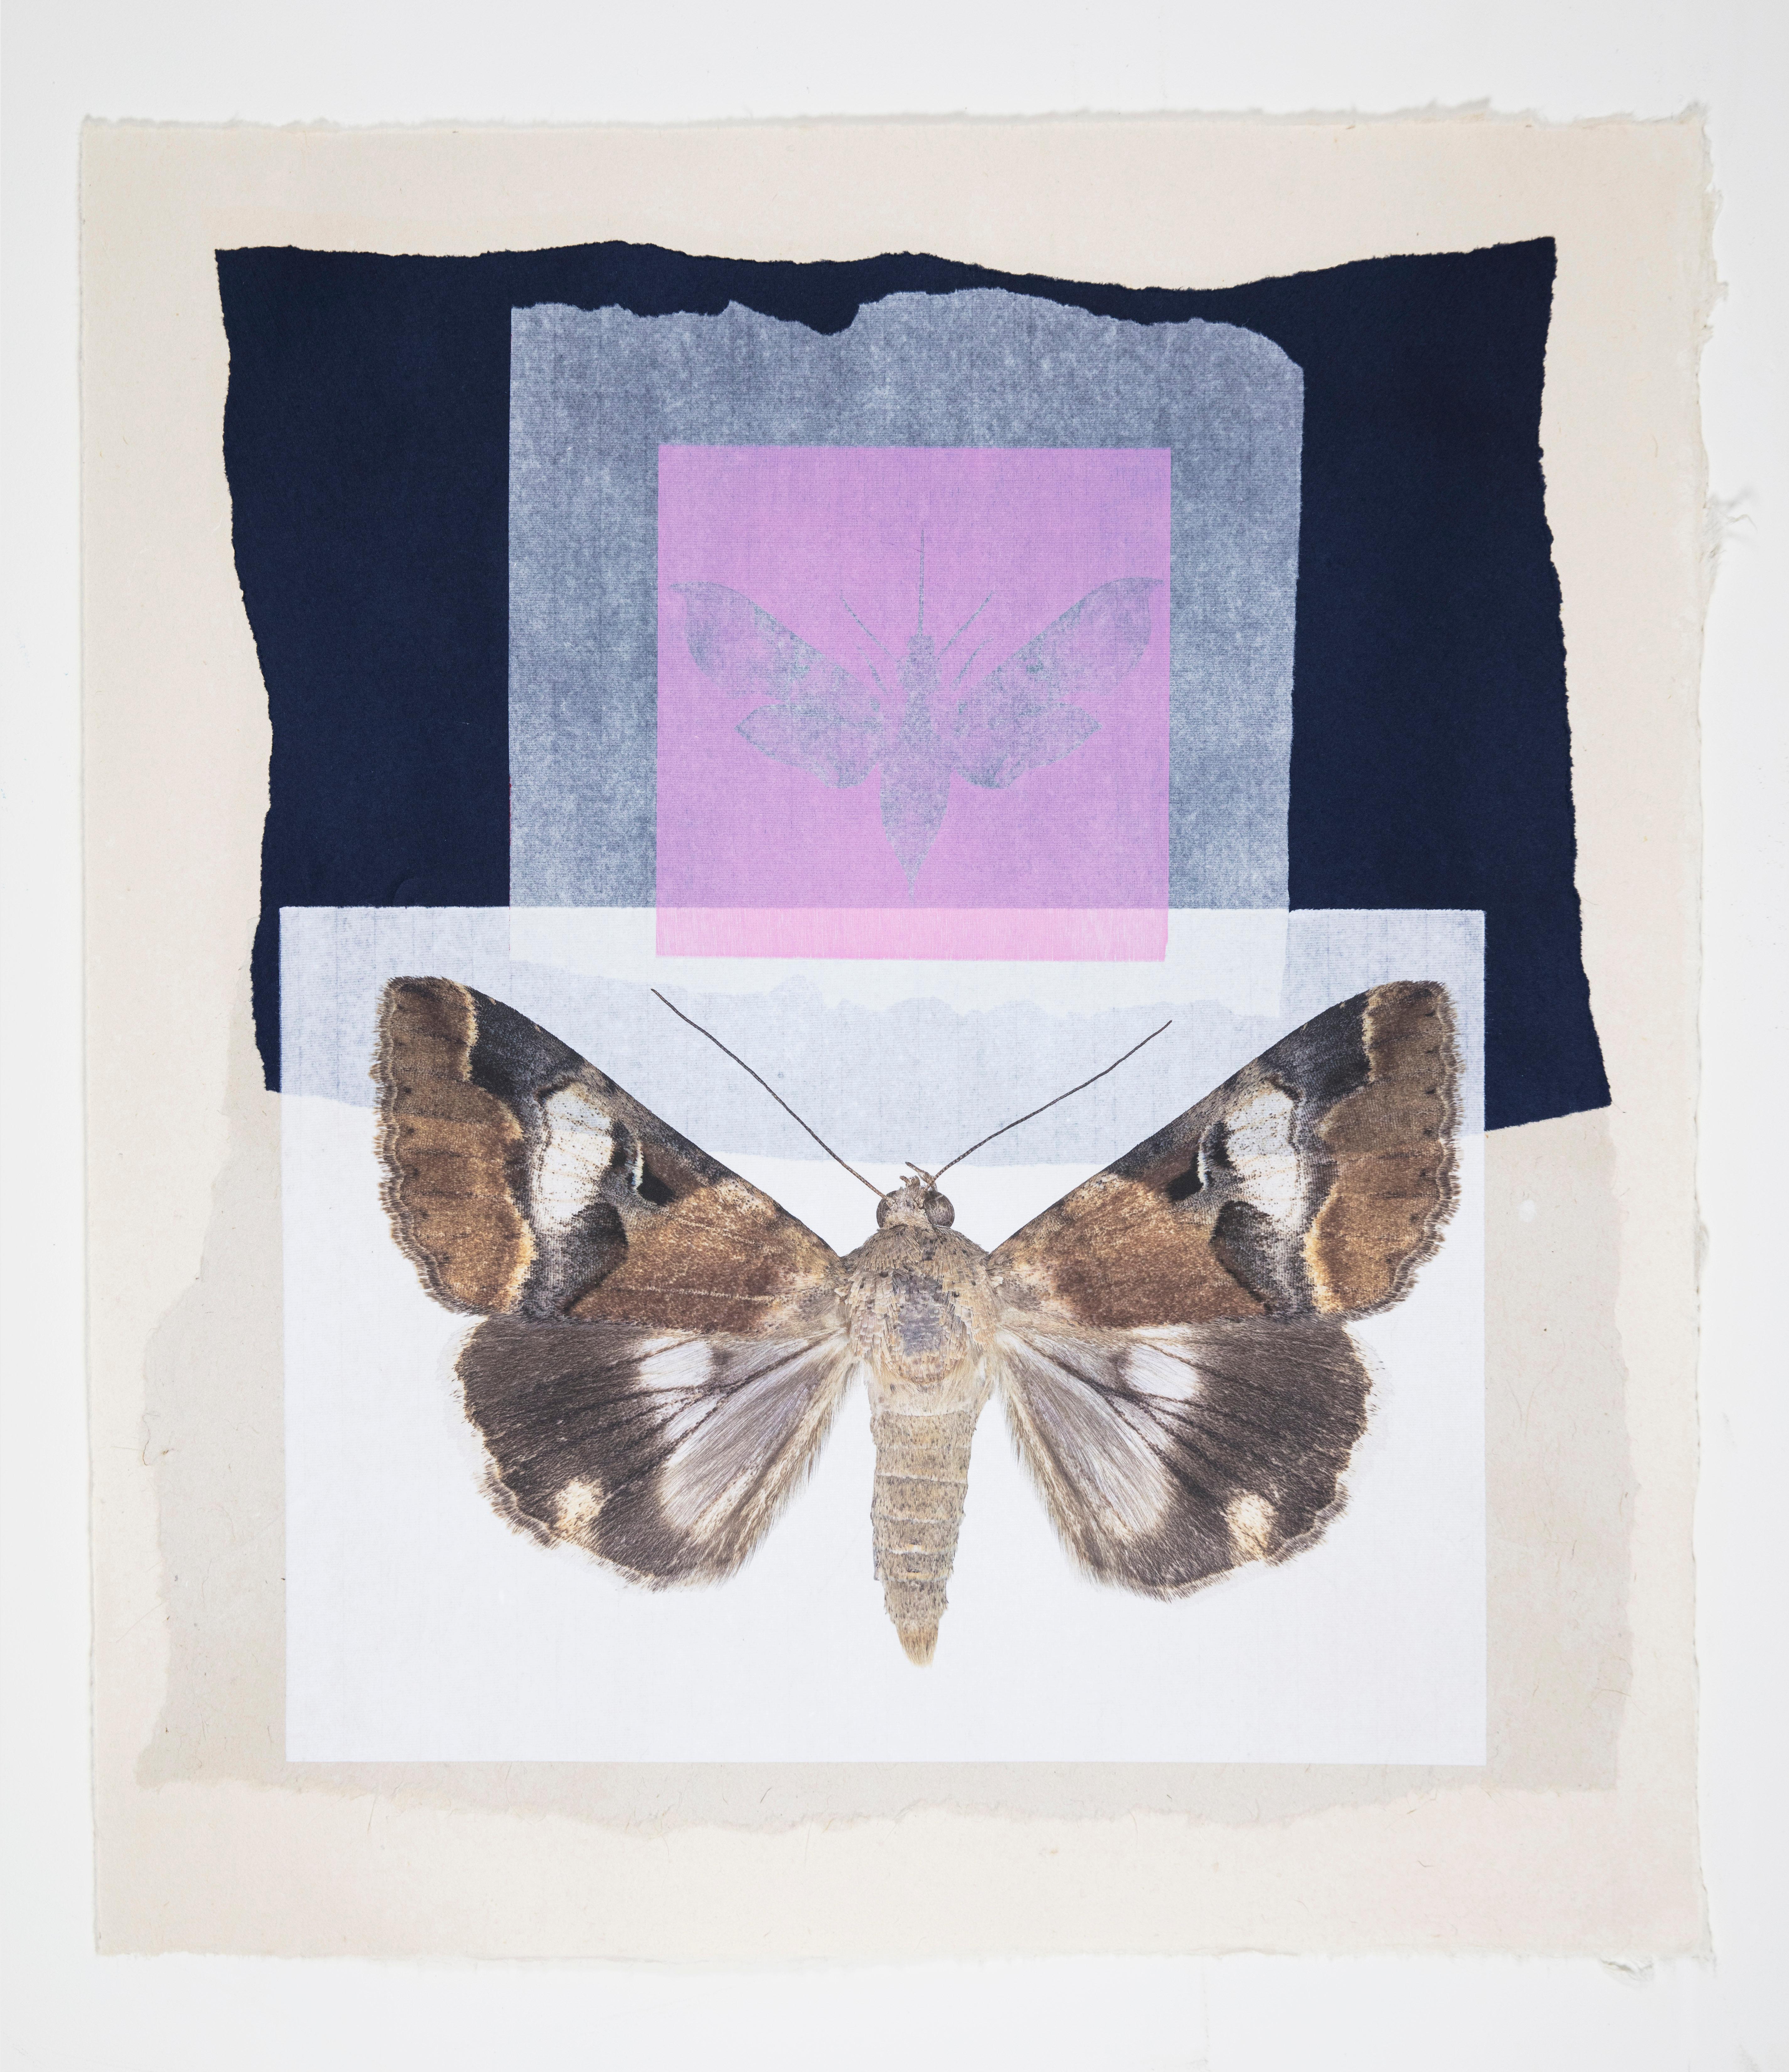 Joseph Scheer Figurative Print - Contemporary Monotype Collage Butterfly Moth Nature Print Framed Pink Blue